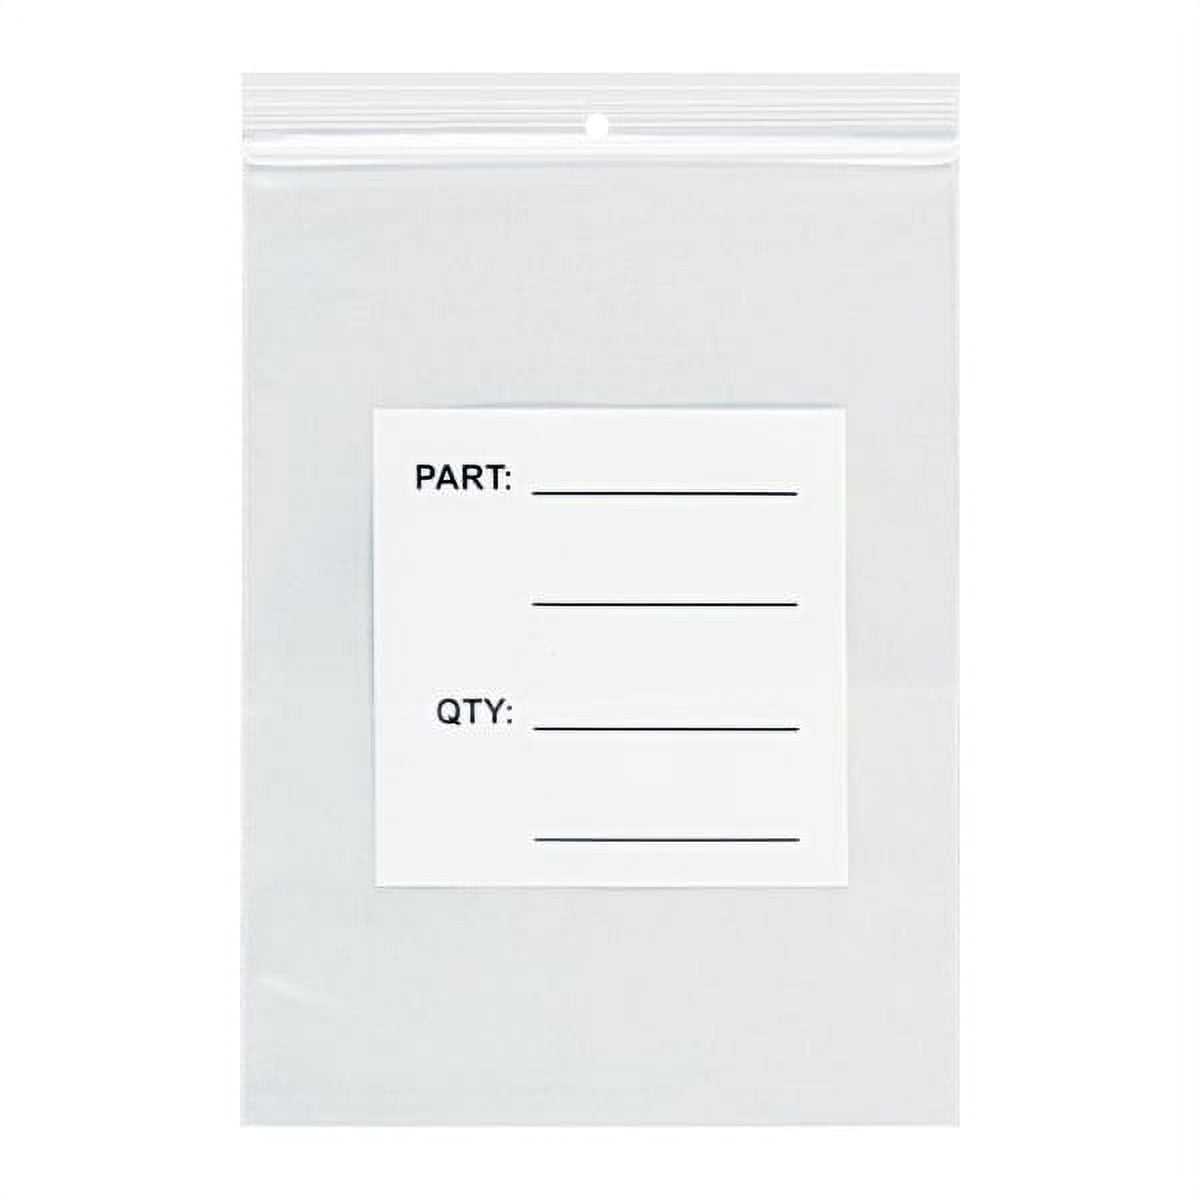 Picture of Box Partners PB12012 10 x 18 in. 4 Mil Parts Bags with Hang Holes - Pack of 500